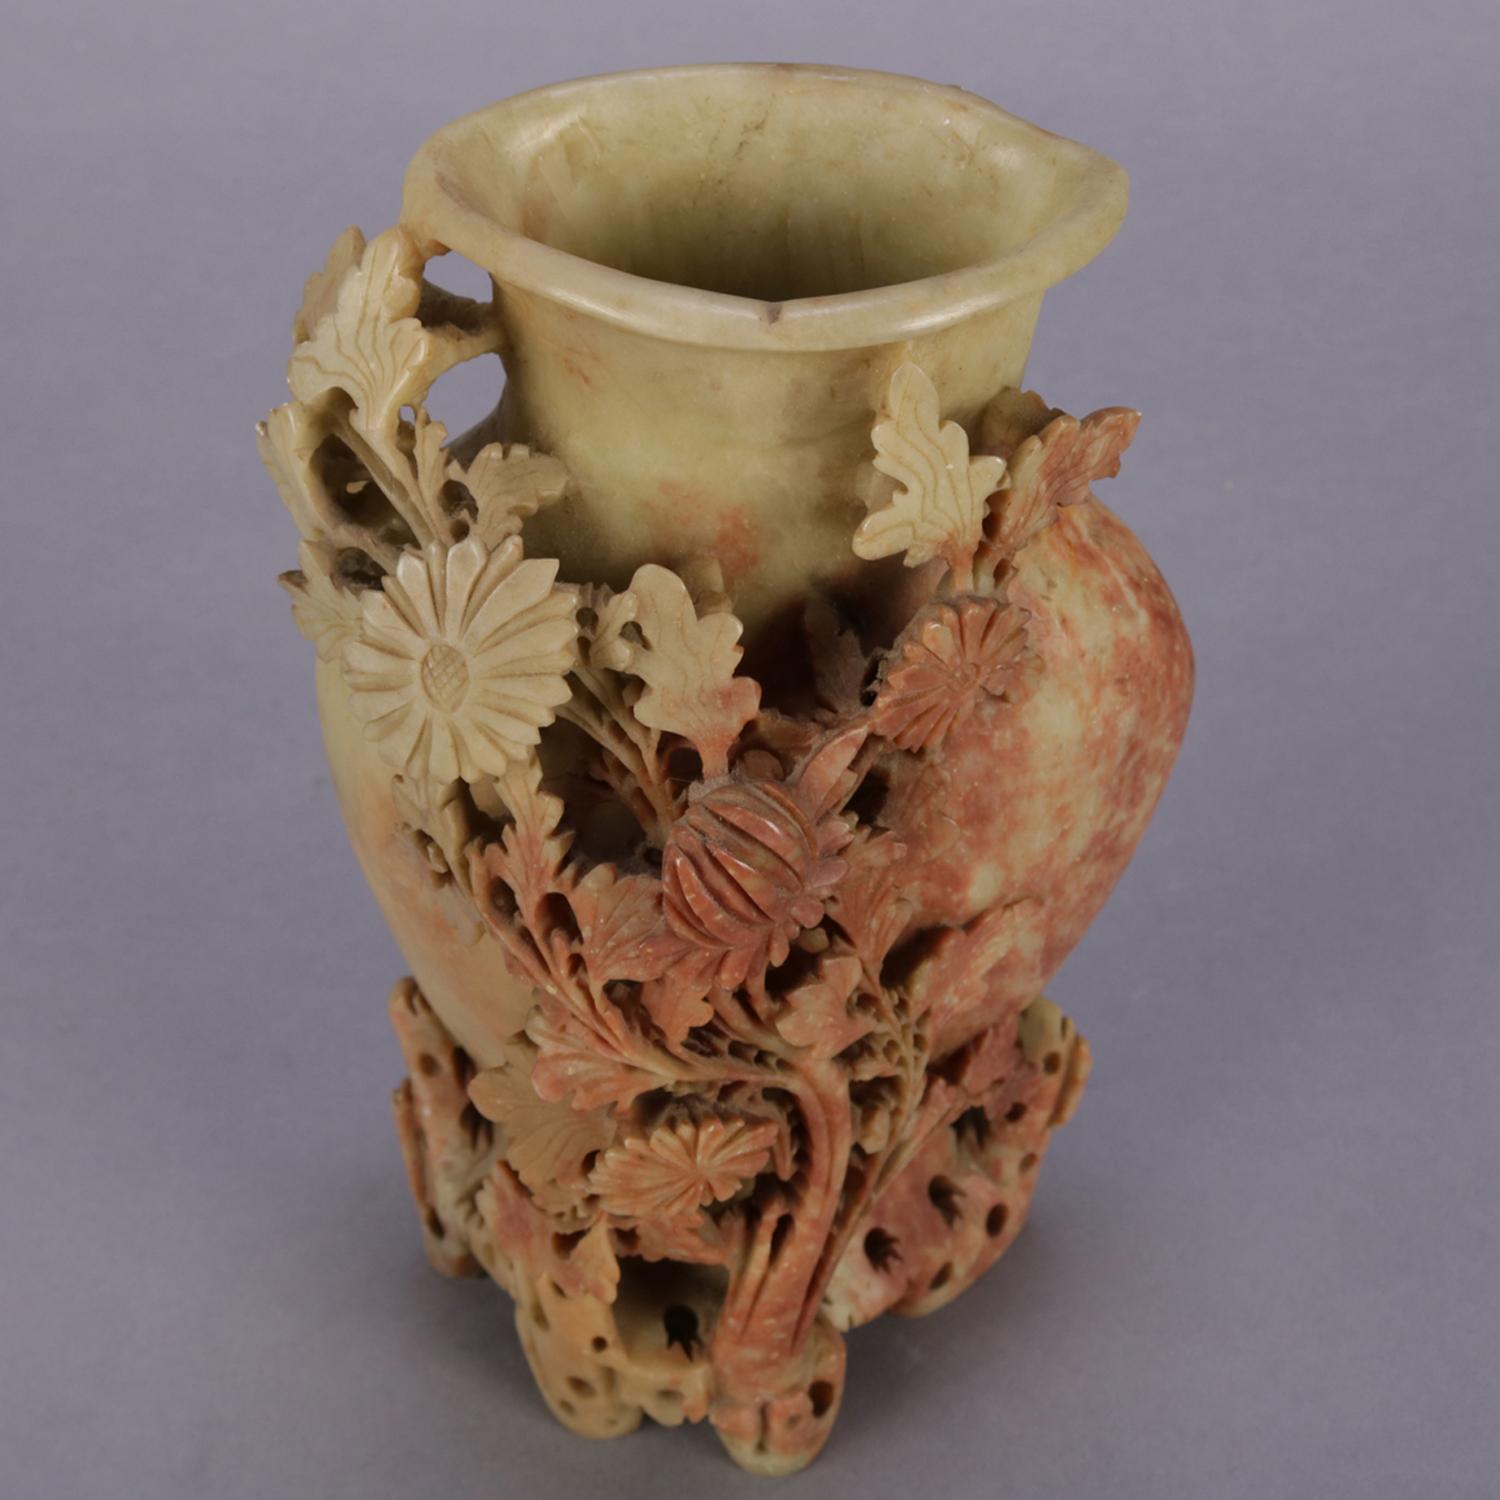 A Chinese carved soapstone sculpture features vase with deeply carved floral and foliate motif, 20th century

***DELIVERY NOTICE – Due to COVID-19 we are employing NO-CONTACT PRACTICES in the transfer of purchased items.  Additionally, for those who